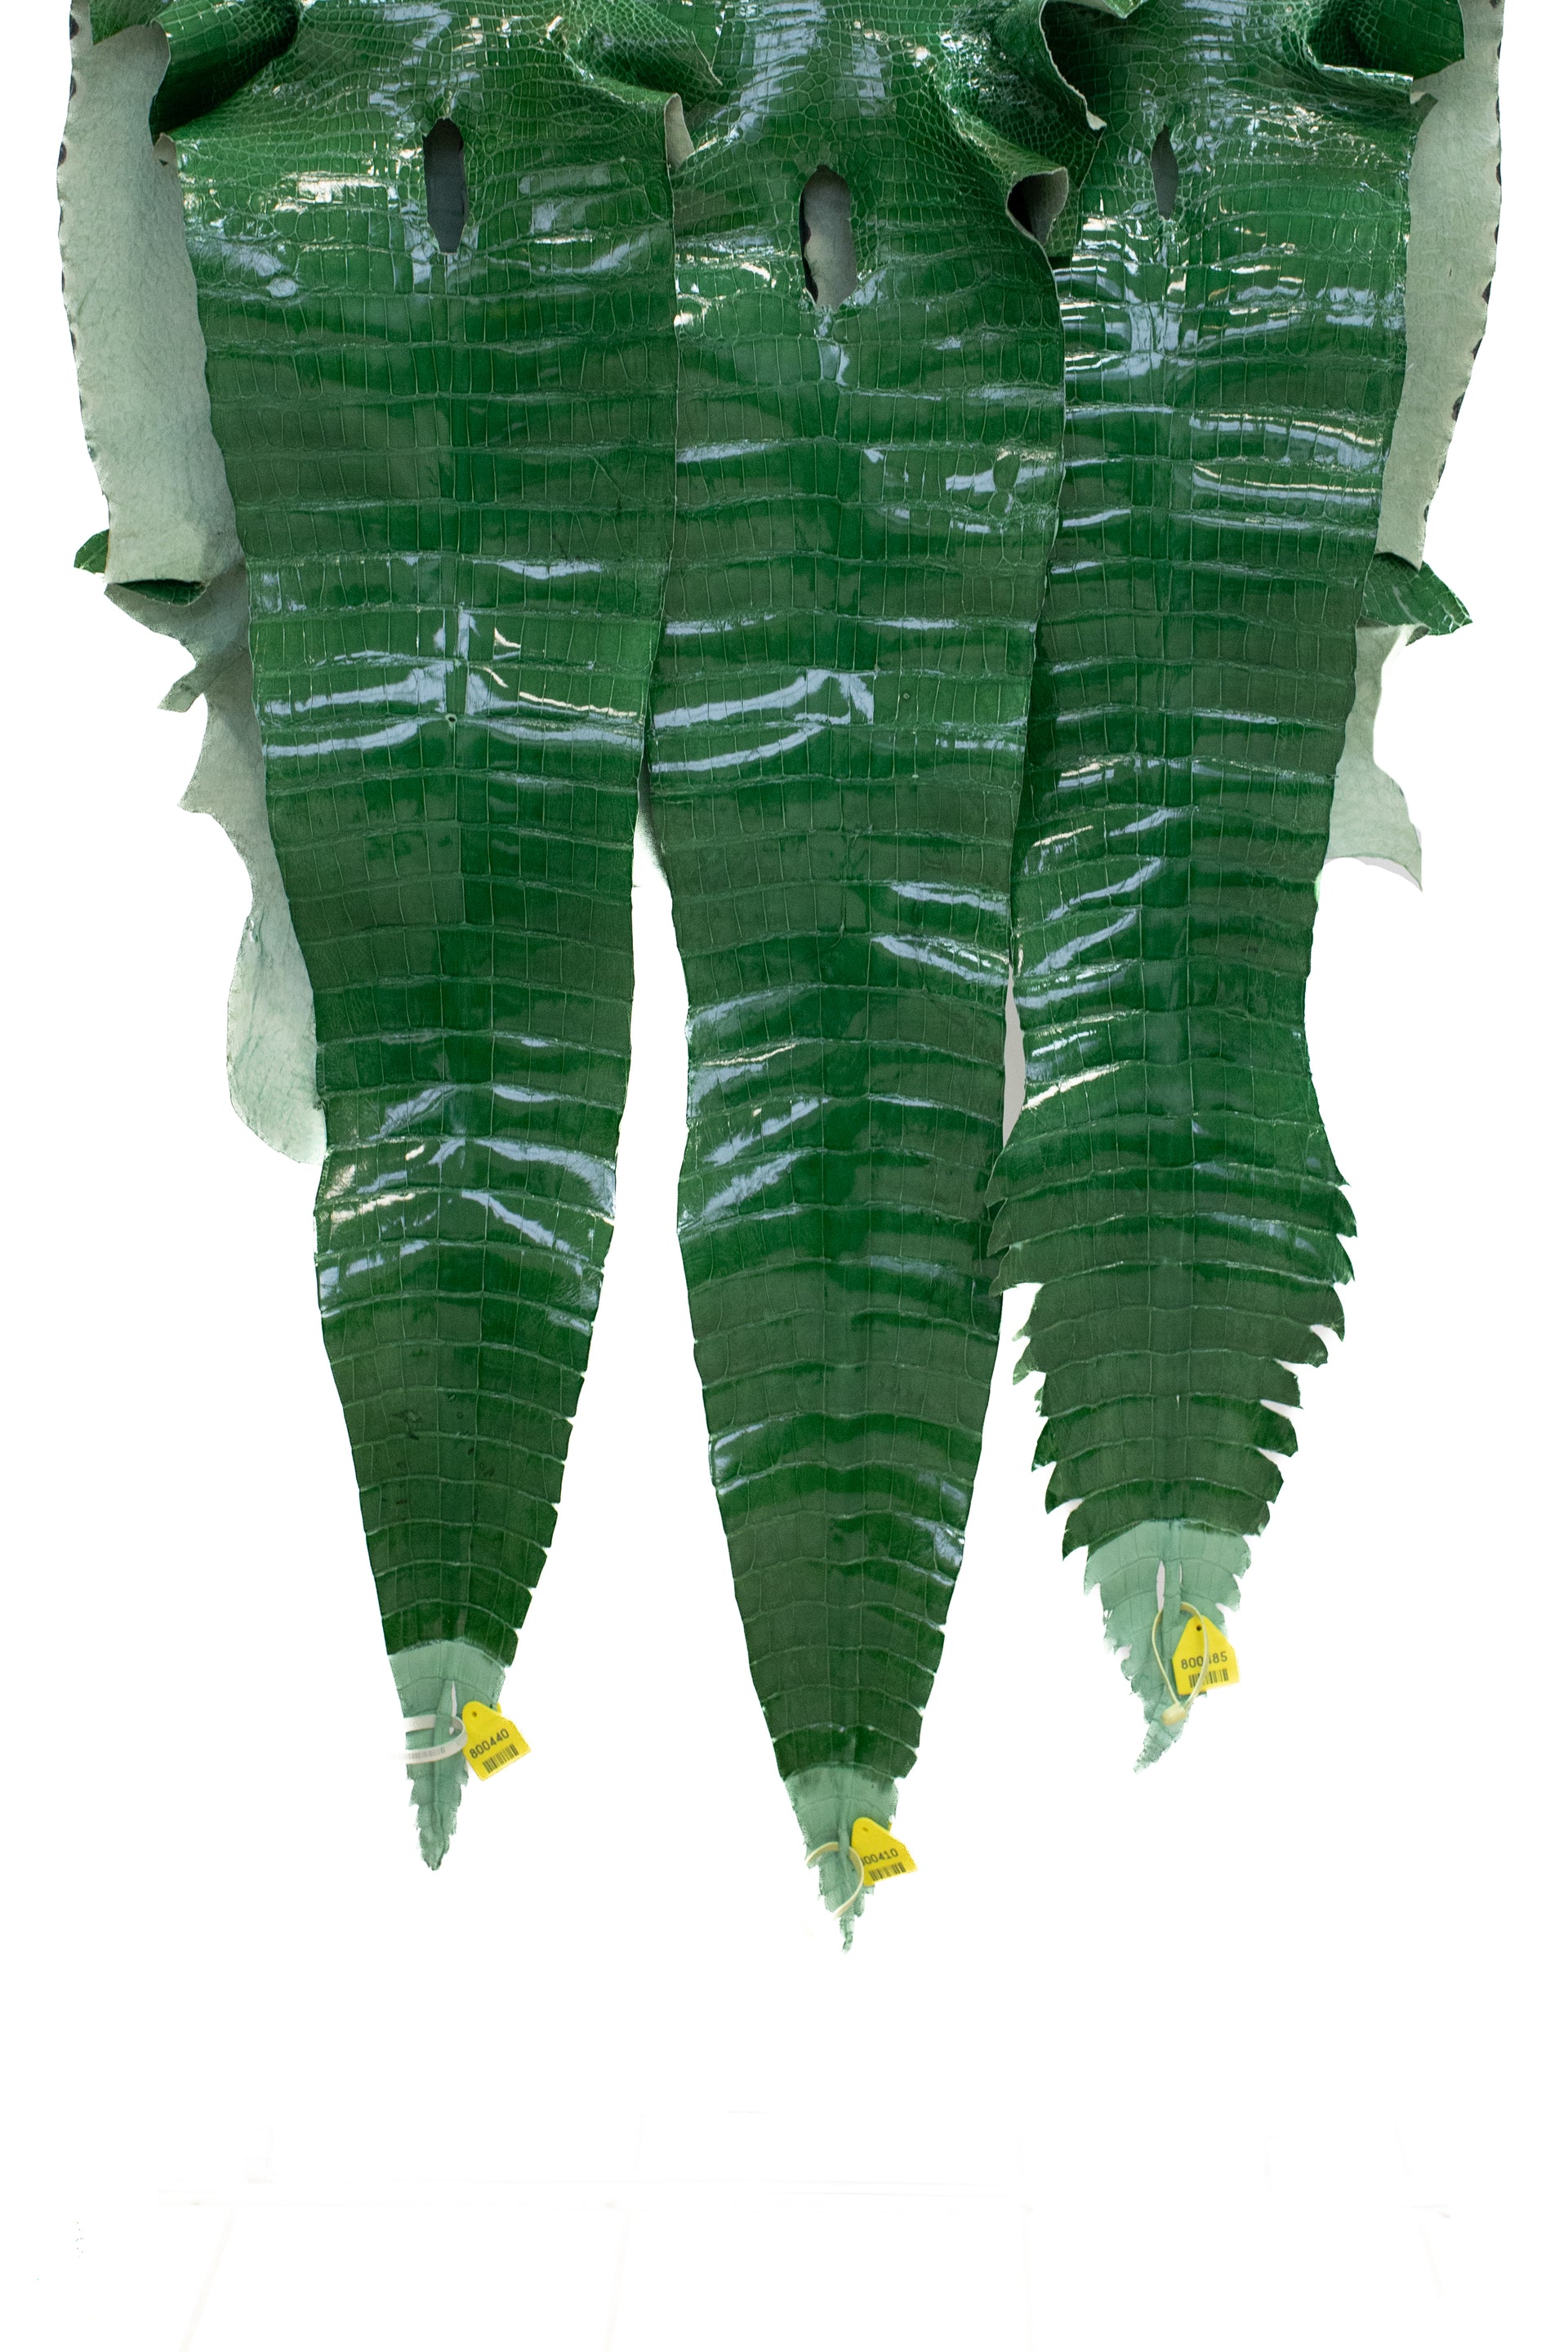 CLOSEOUT | 43-47 cm Grade 3/4 Or Better Grass Green Glazed American Alligator Leather